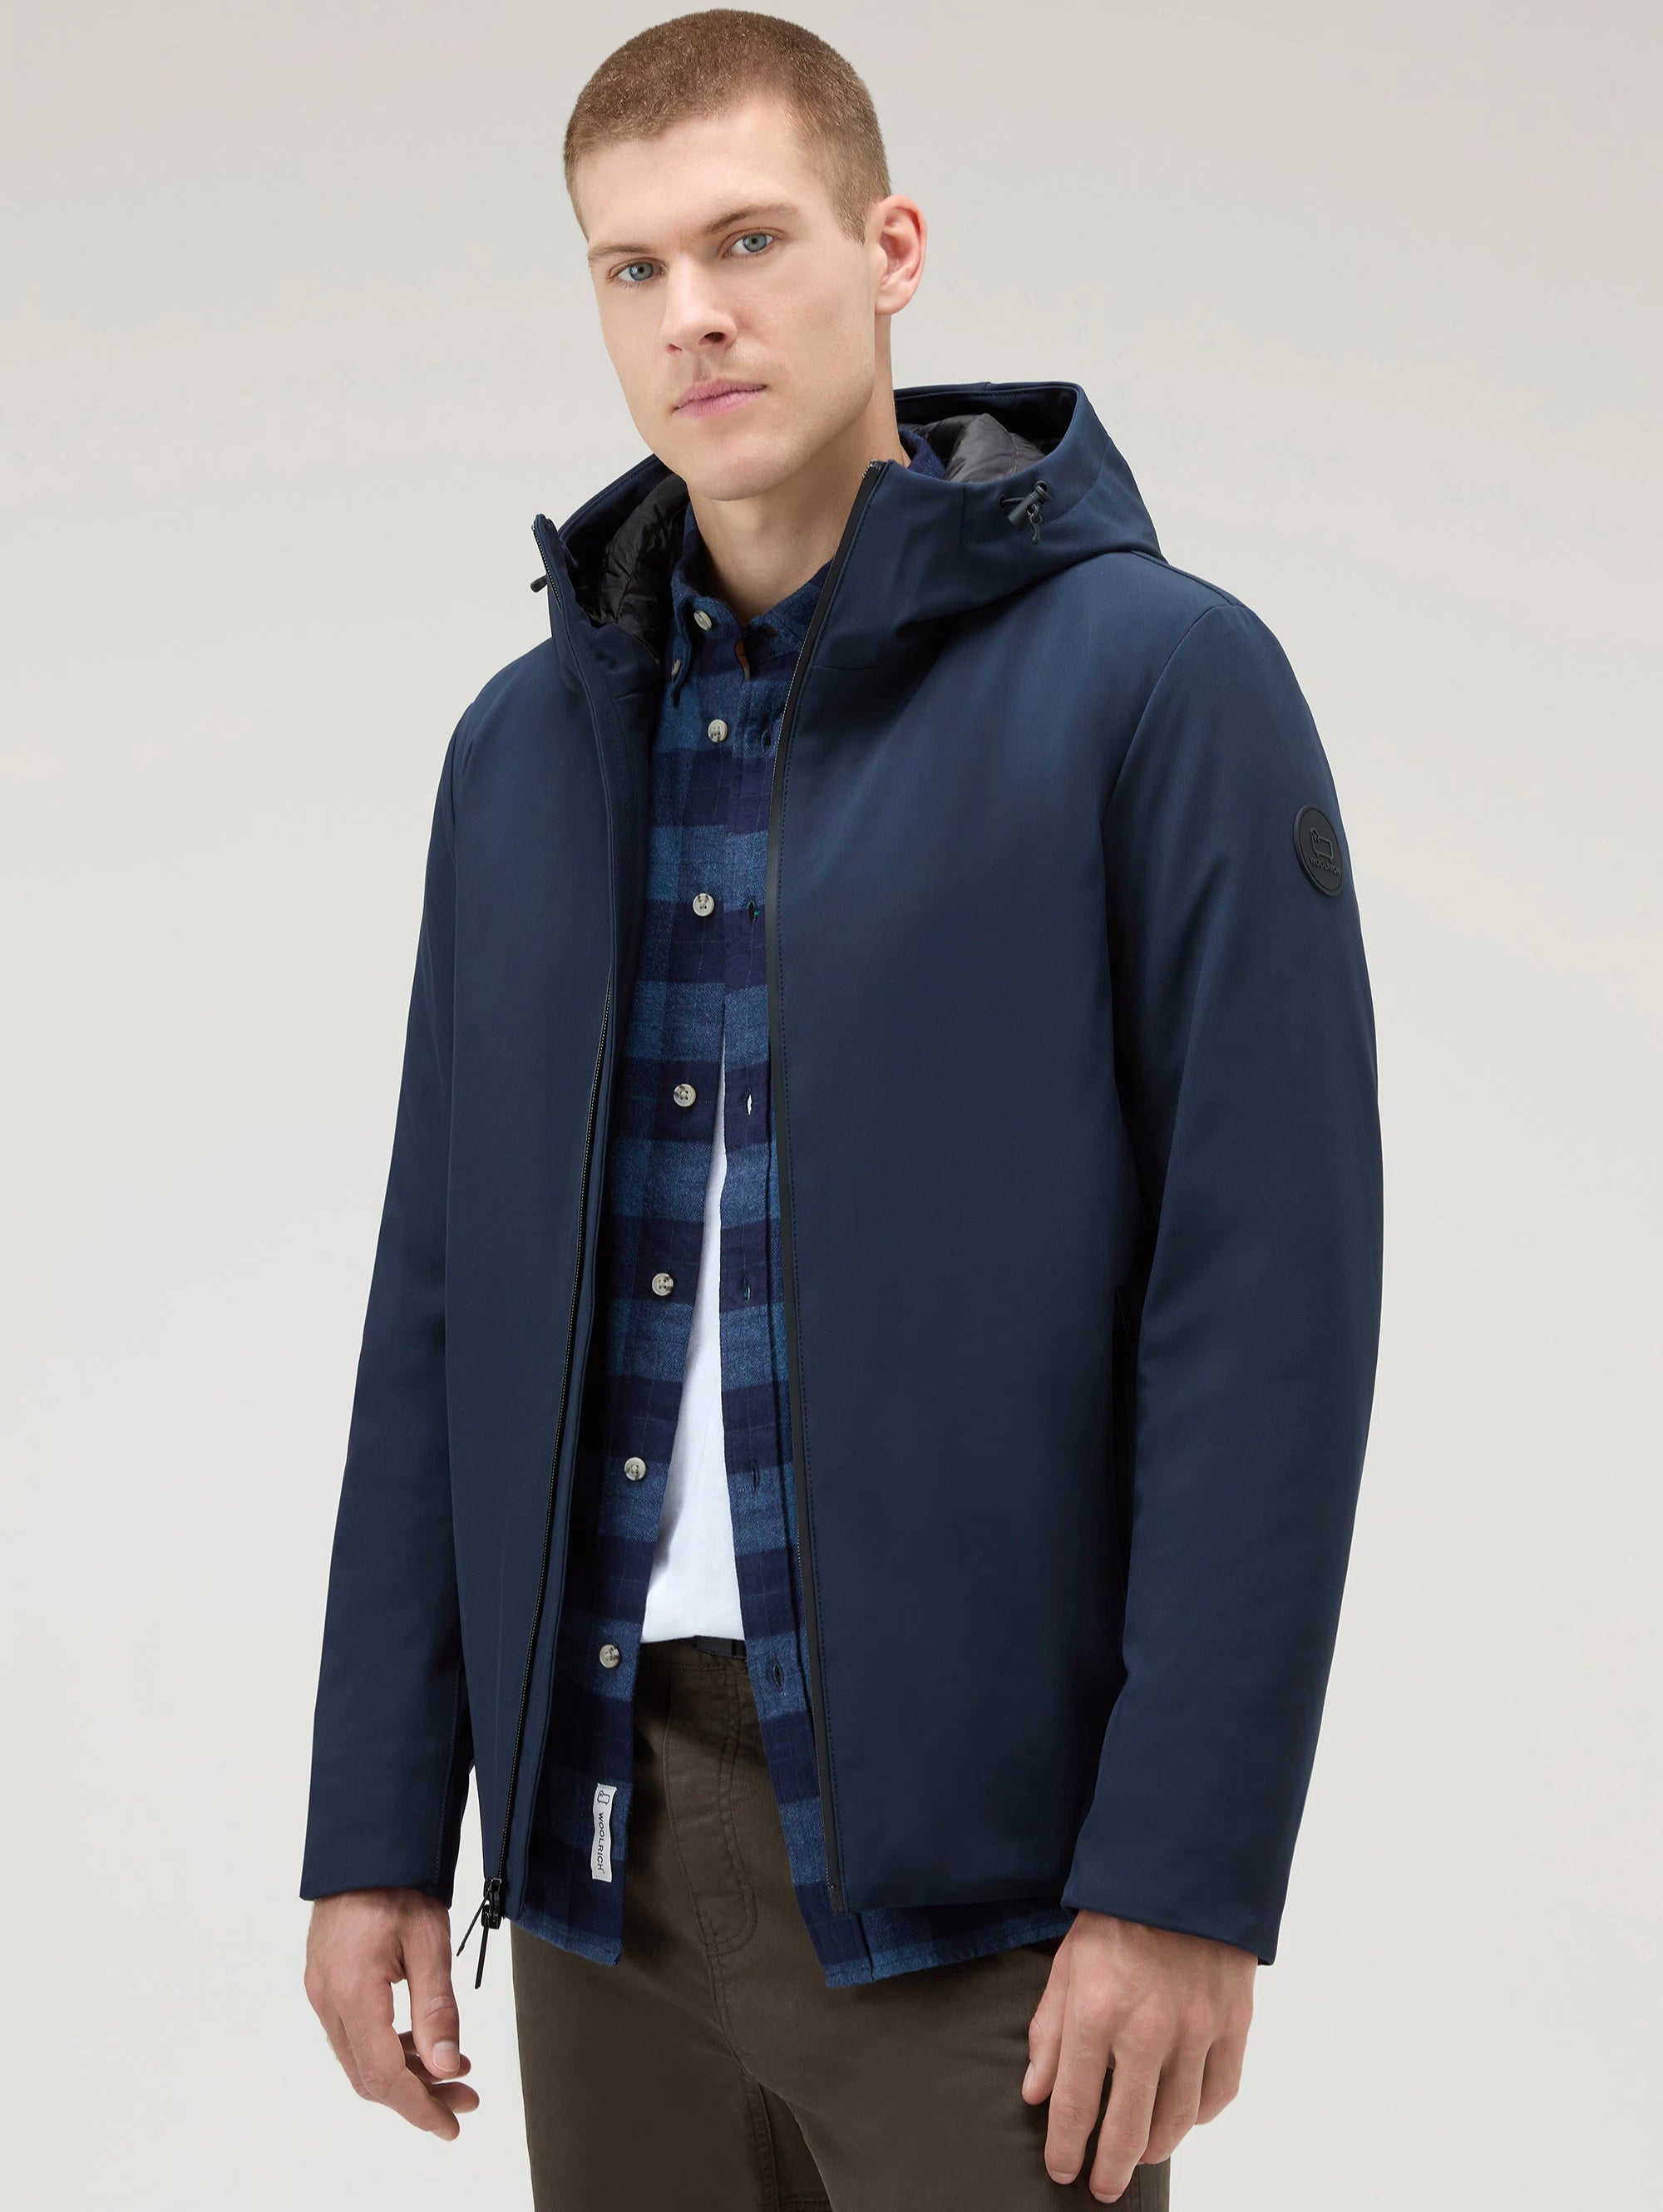 Pacific Blue Windproof Hooded Jacket